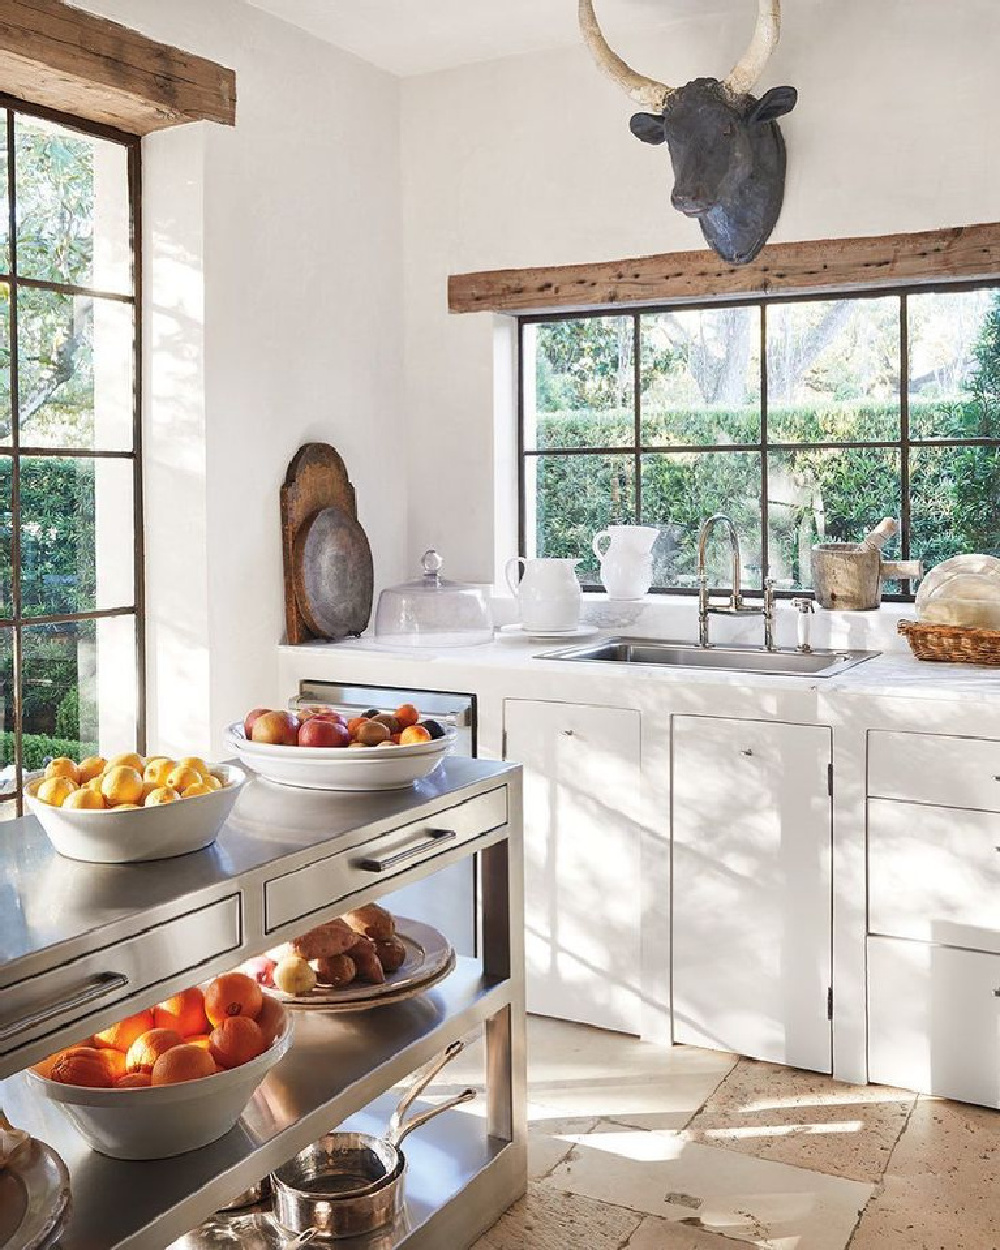 French country white kitchen designed by Pamela Pierce - photo by Miguel Flores Vianna. #frenchkitchen #frenchcountry #kitchendesign #oldworld #pamelapierce #modernfrench